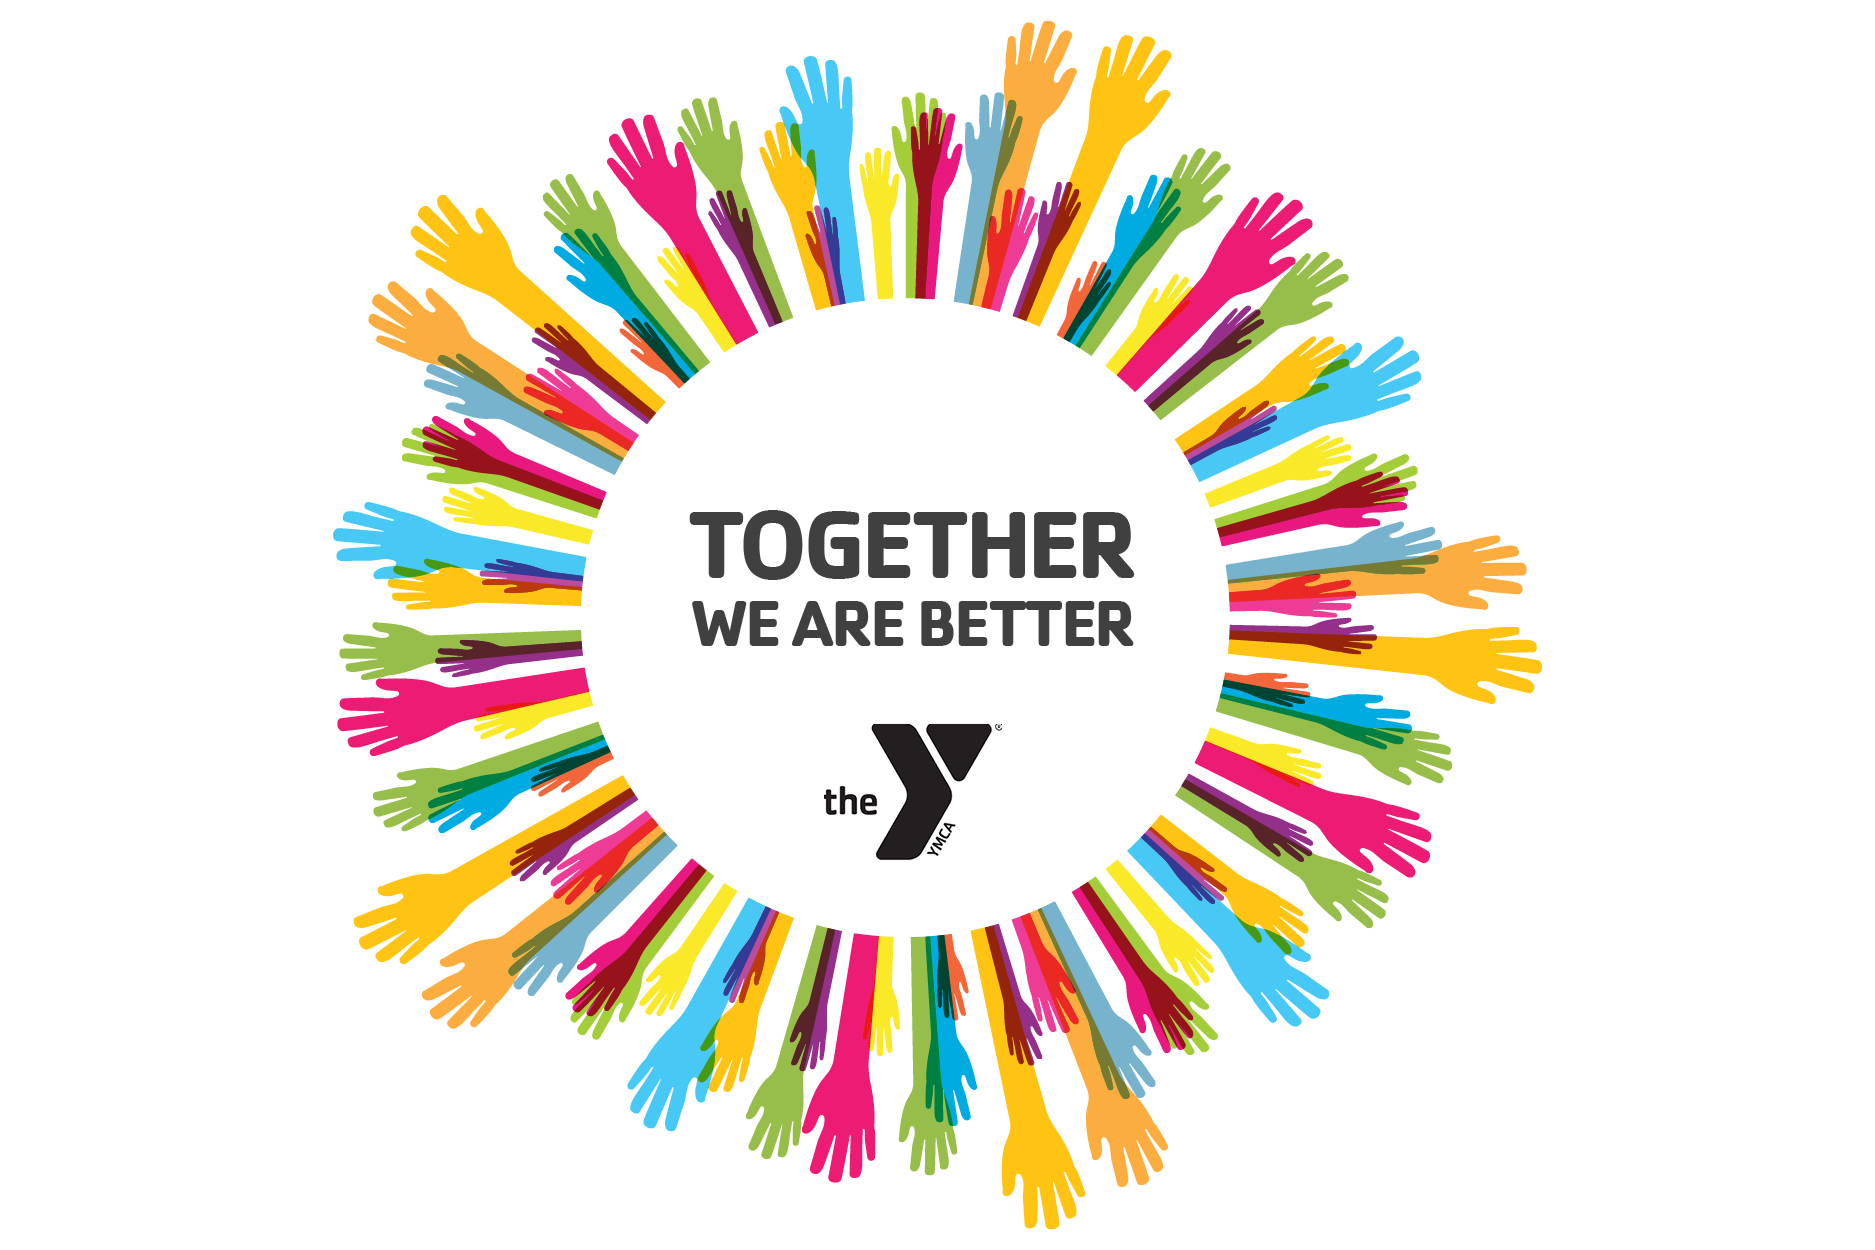 YMCA 21-Day Equity Challenge